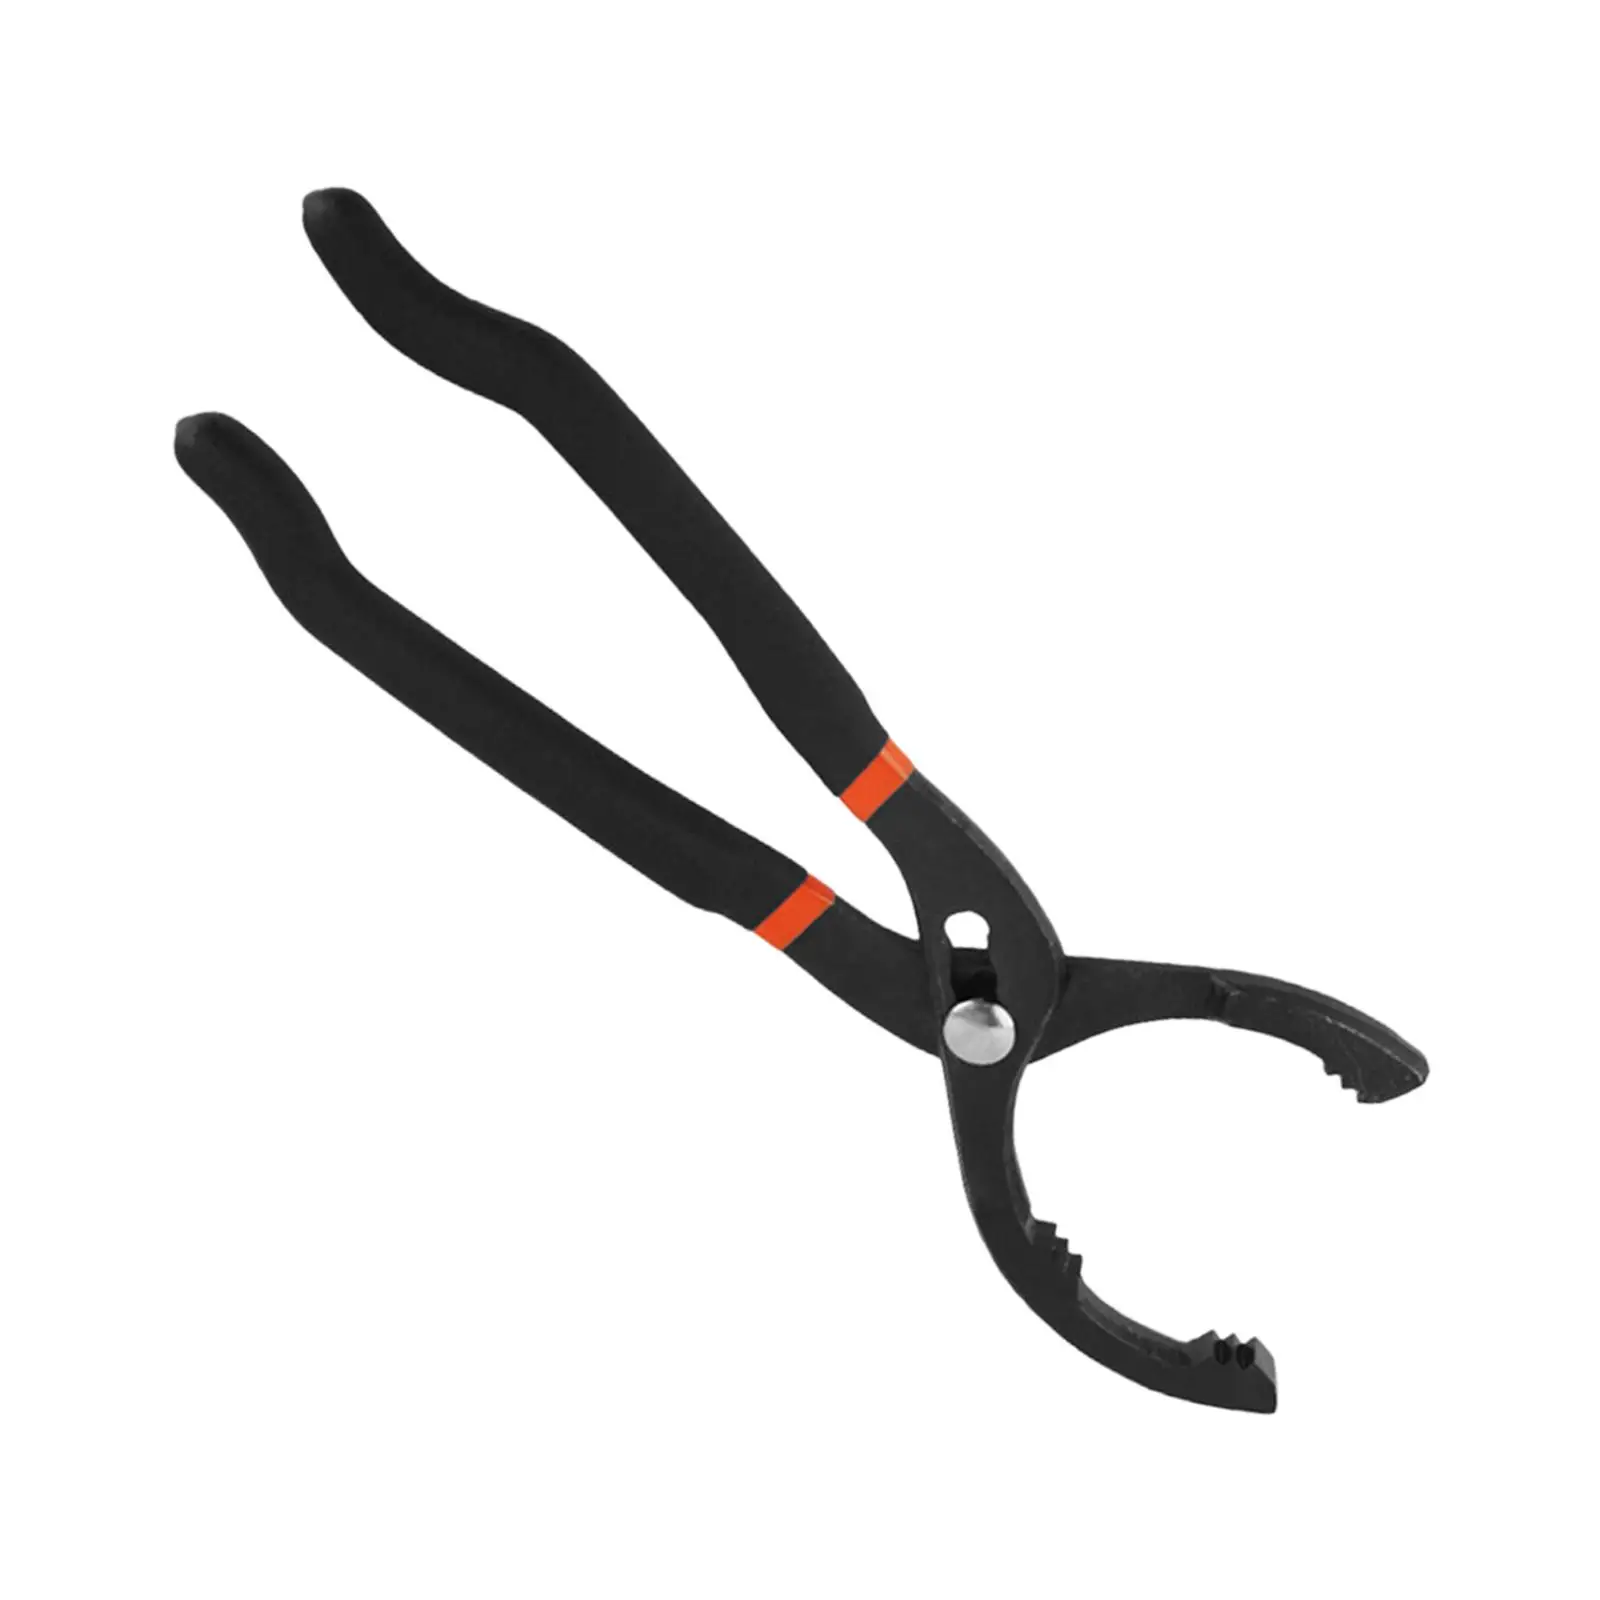 12 inch Filter Wrench Pliers Repair Tool Convenient Universal Sturdy Durable Useful Hand Removal Plier Oil Filter Wrench